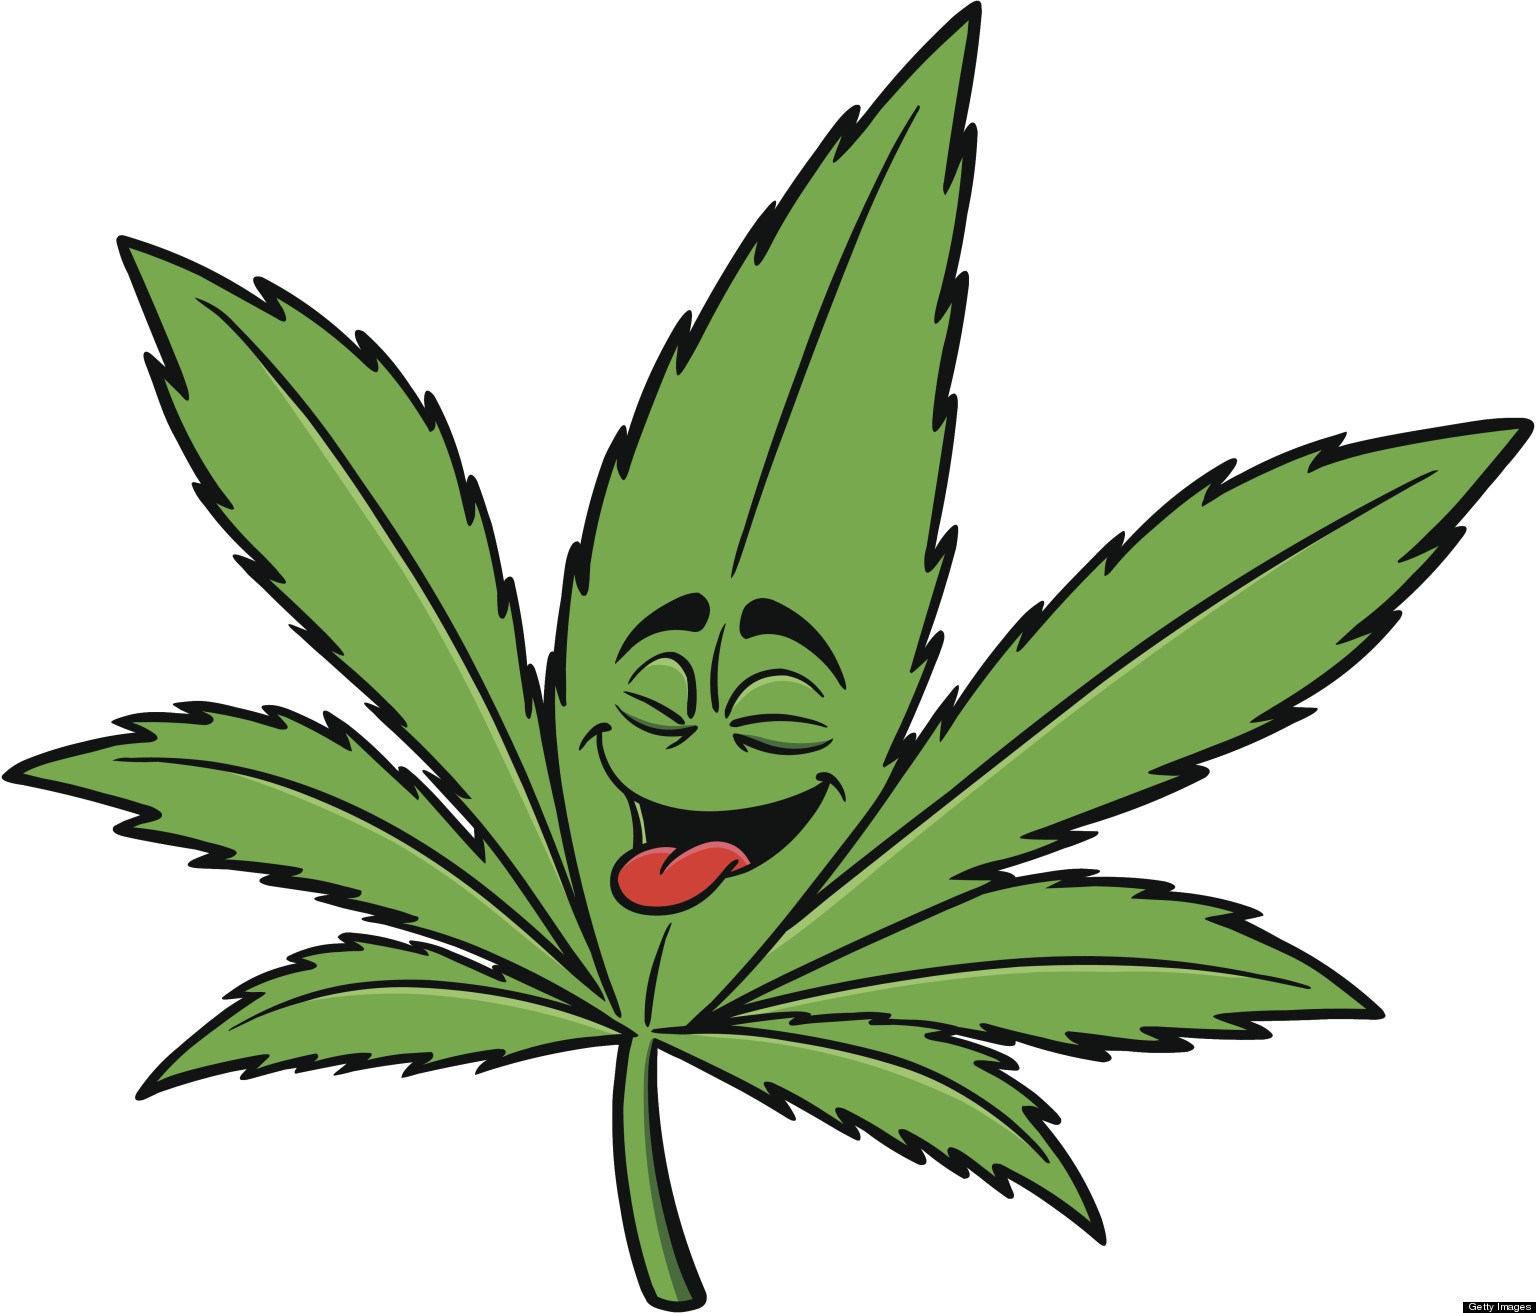 ... Weed Leaf Clip Art - clipartall ...